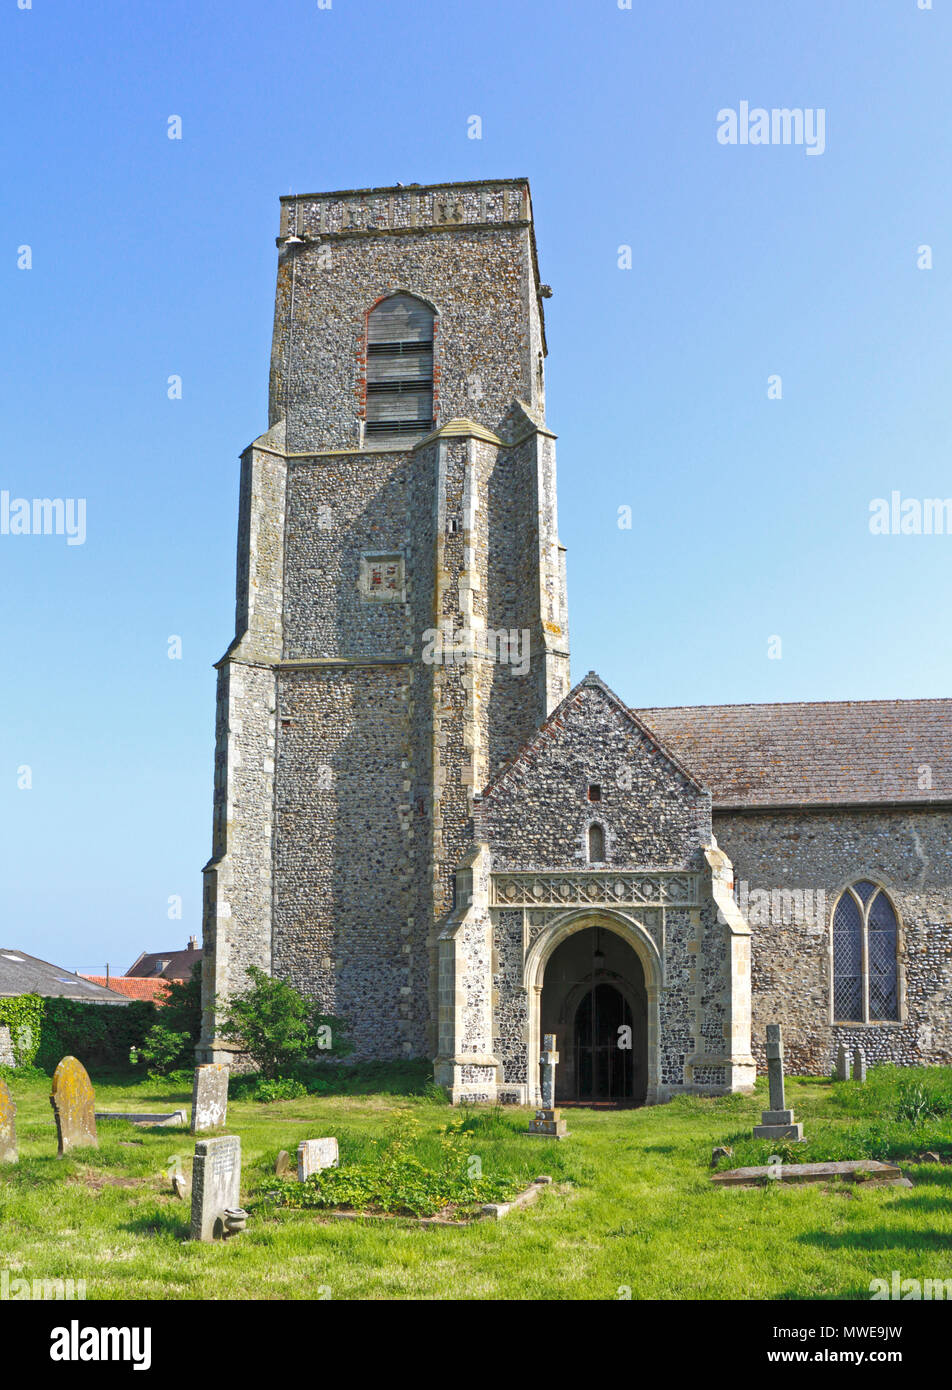 A view of the south porch and tower of the church of St John at Waxham, Norfolk, England, United Kingdom, Europe. Stock Photo